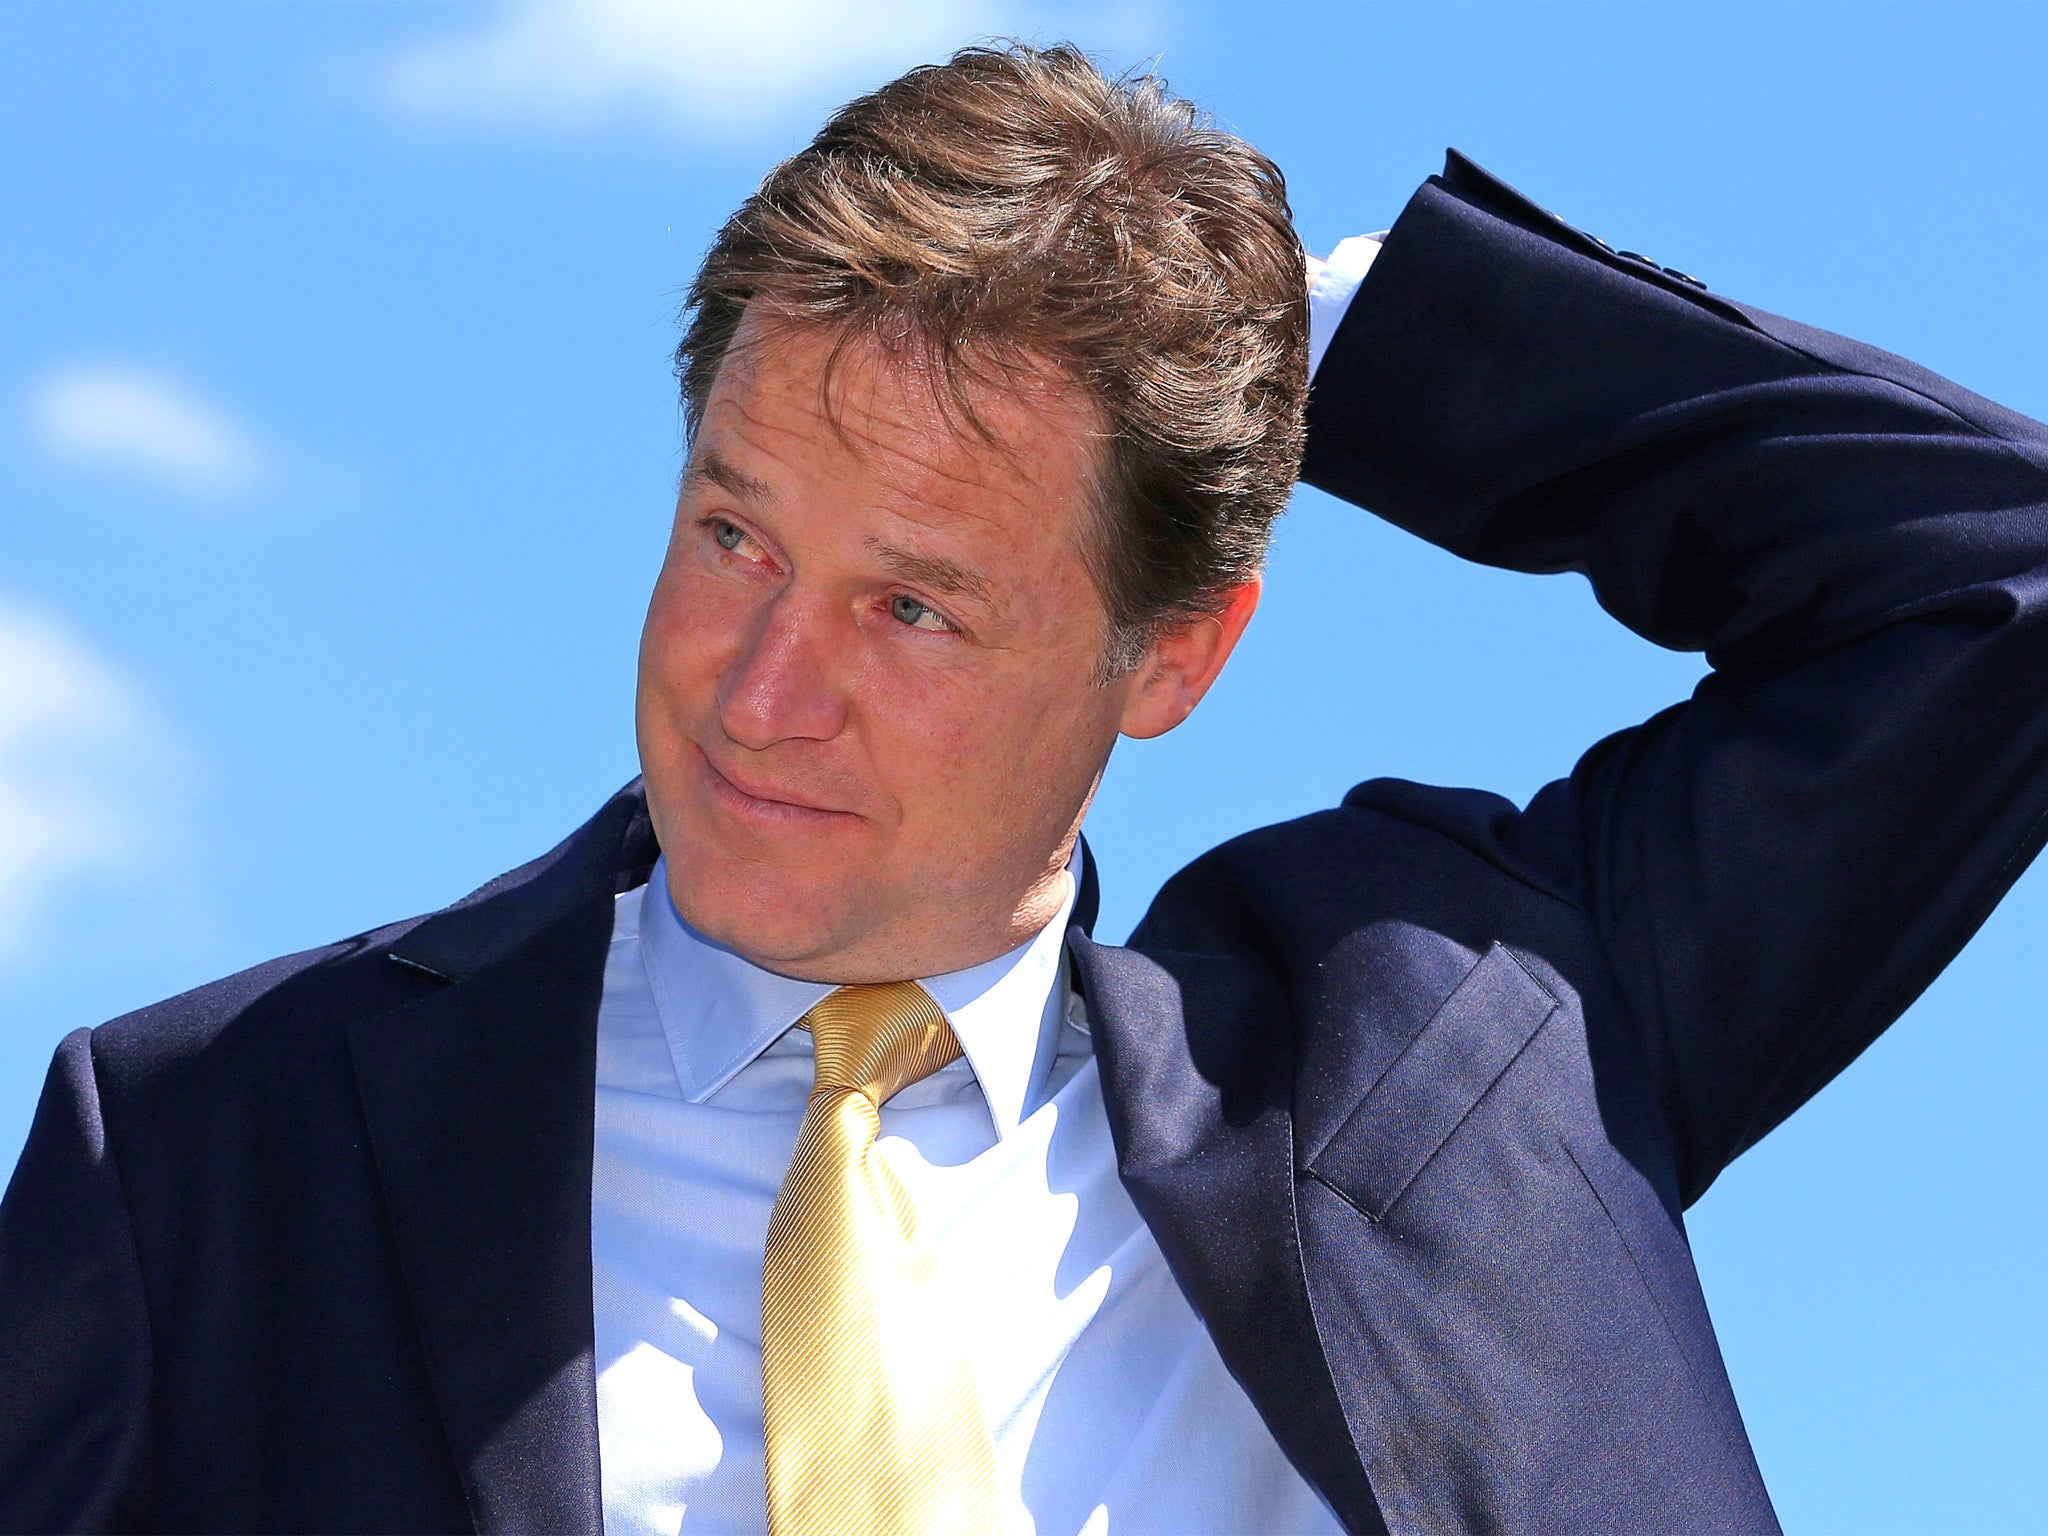 41 per cent of Lib Dem activists are dissatisfied with Nick Clegg's performance as party leader